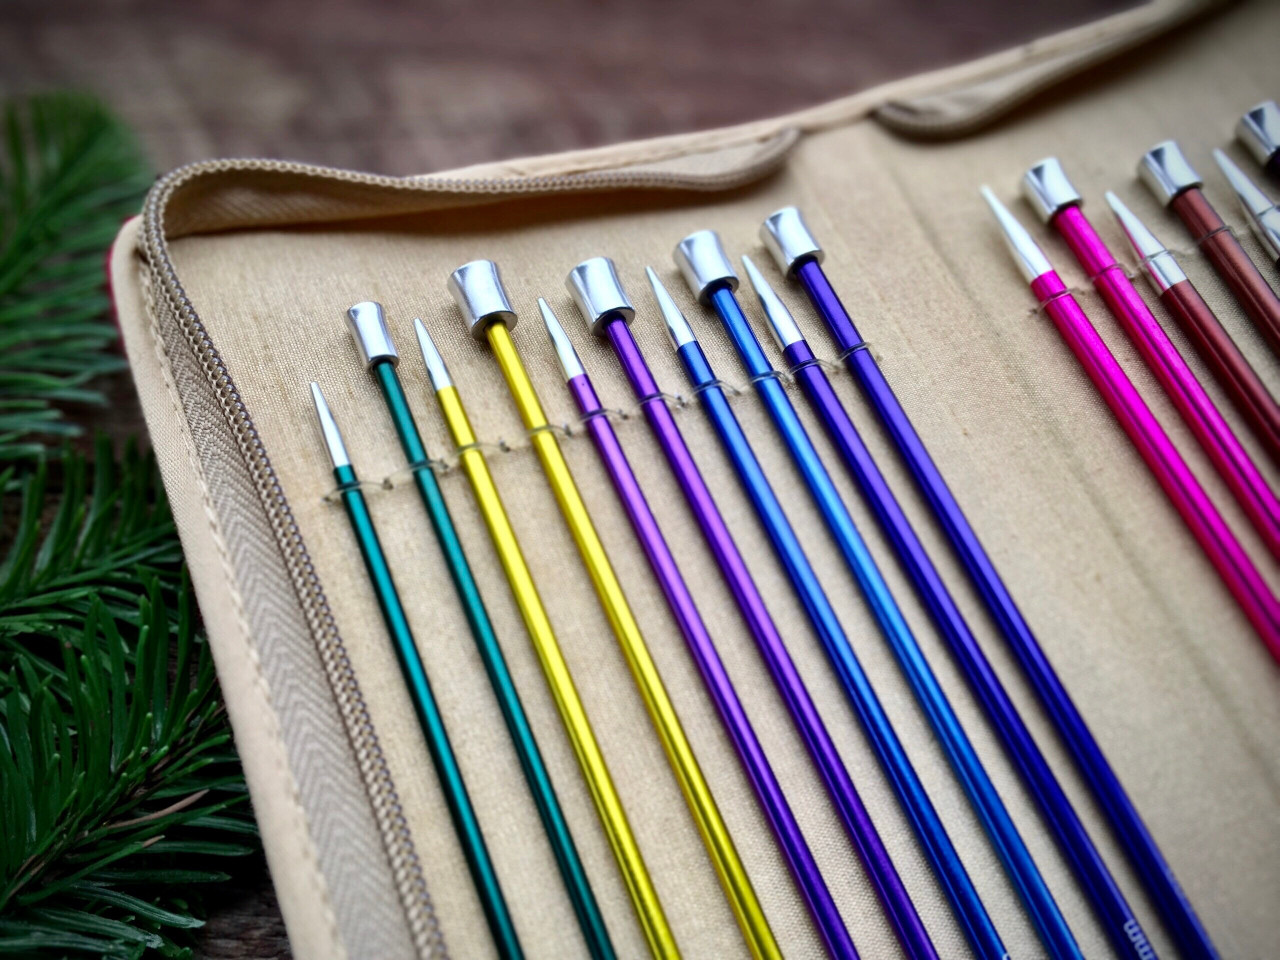  Knitter's Pride Zing Knitting Needles Circular 32 inch Size US  8 (5mm) Bundle with 10 Artsiga Crafts Stitch Markers 140131